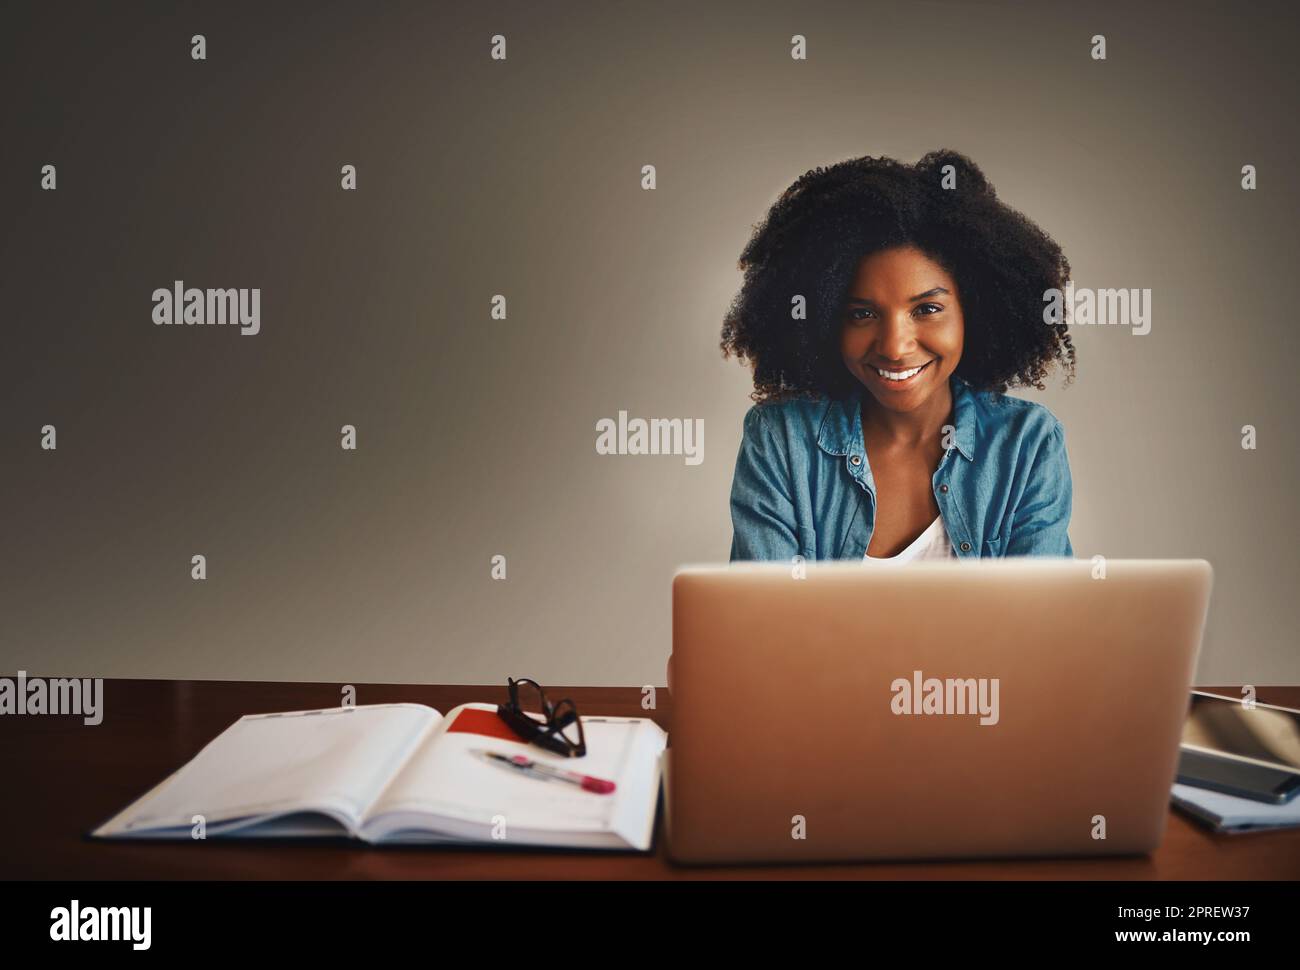 Im proof that anyone can start a successful home business. Studio portrait of an attractive young woman working on a laptop against a dark background. Stock Photo